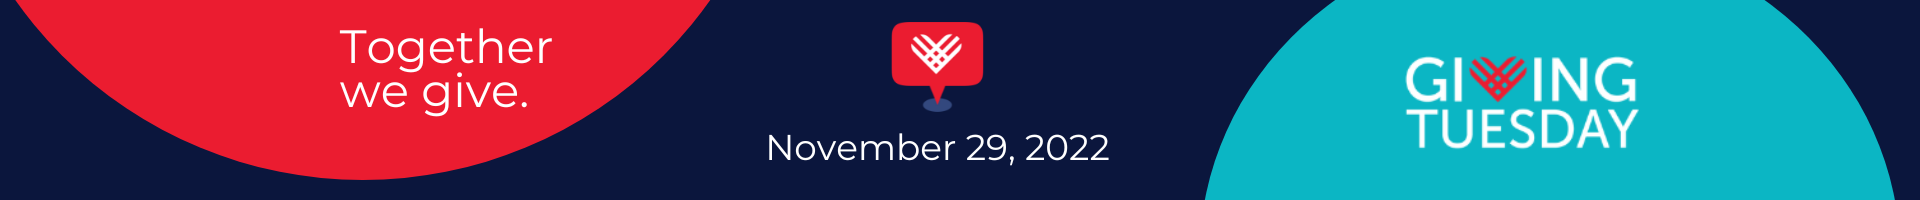 Banner with geometric shapes, Giving Tuesday logo and text: Together we give. SAVE THE DATE (followed by Giving Tuesday icon) and November 29, 2022.